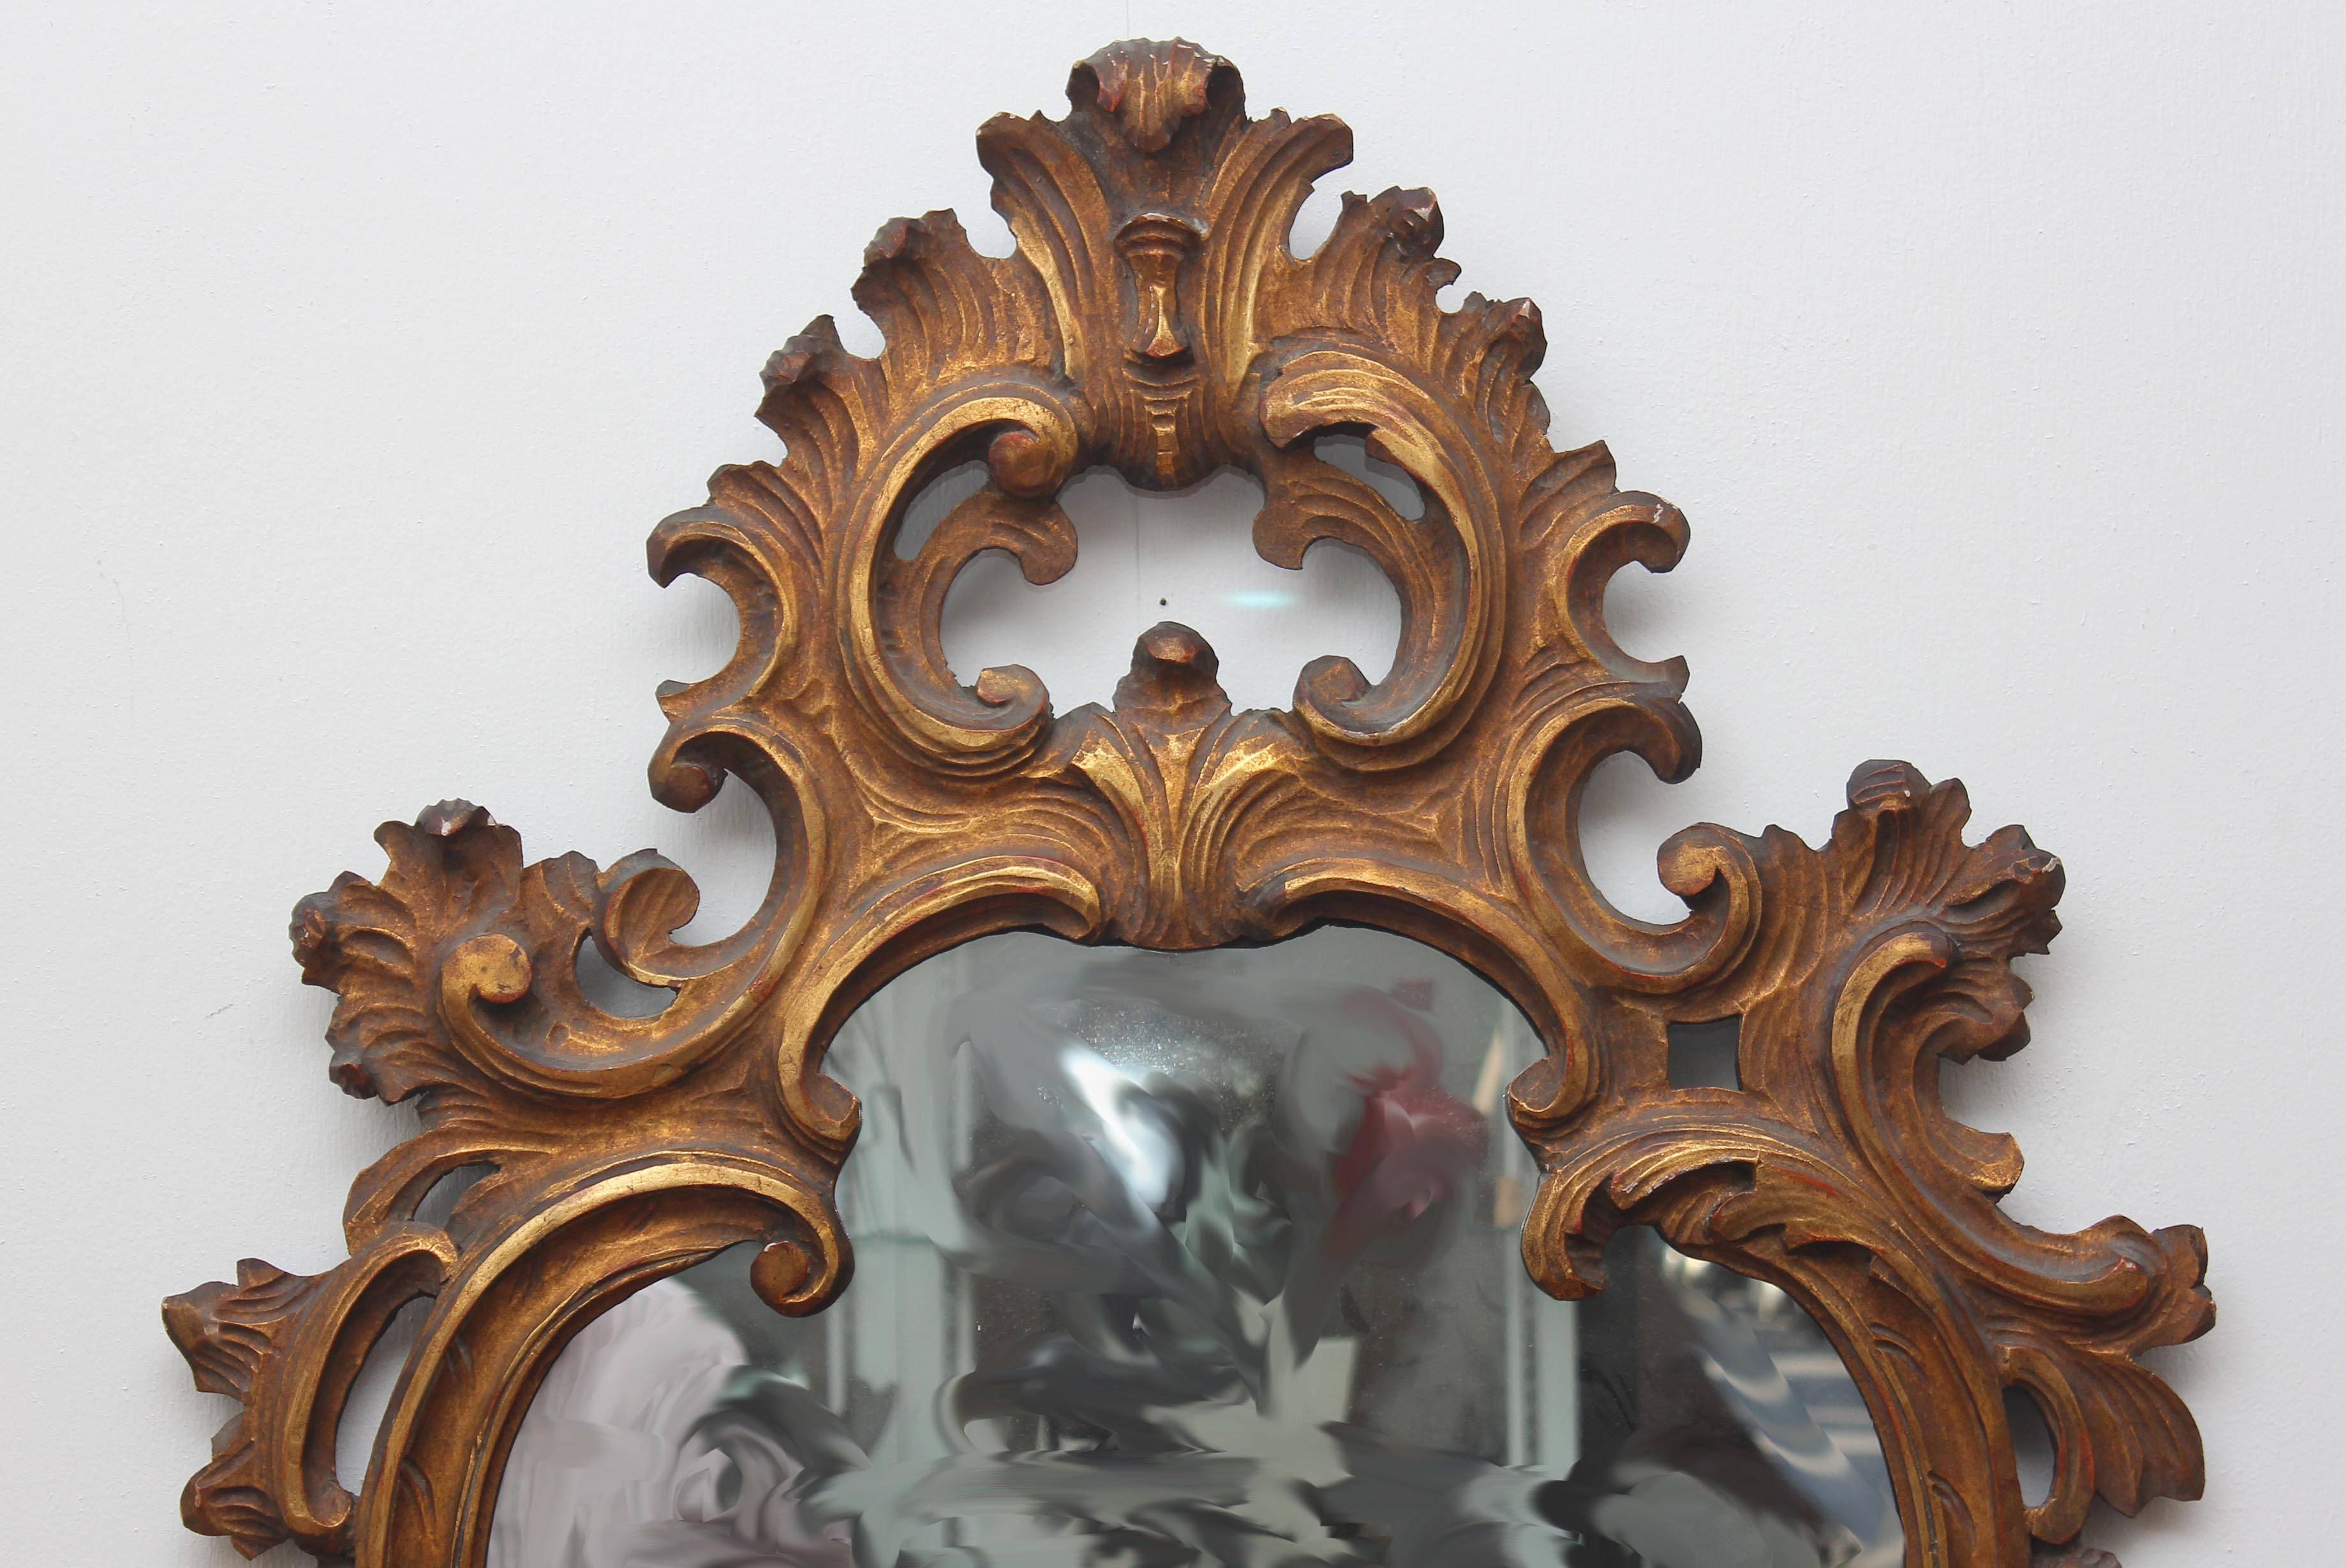 Large Venetian Baroque style carved giltwood mirror. Excellent quality. See our other mirrors. Please, contact us for shipping options.
Presented by Joseph Dasta Antiques